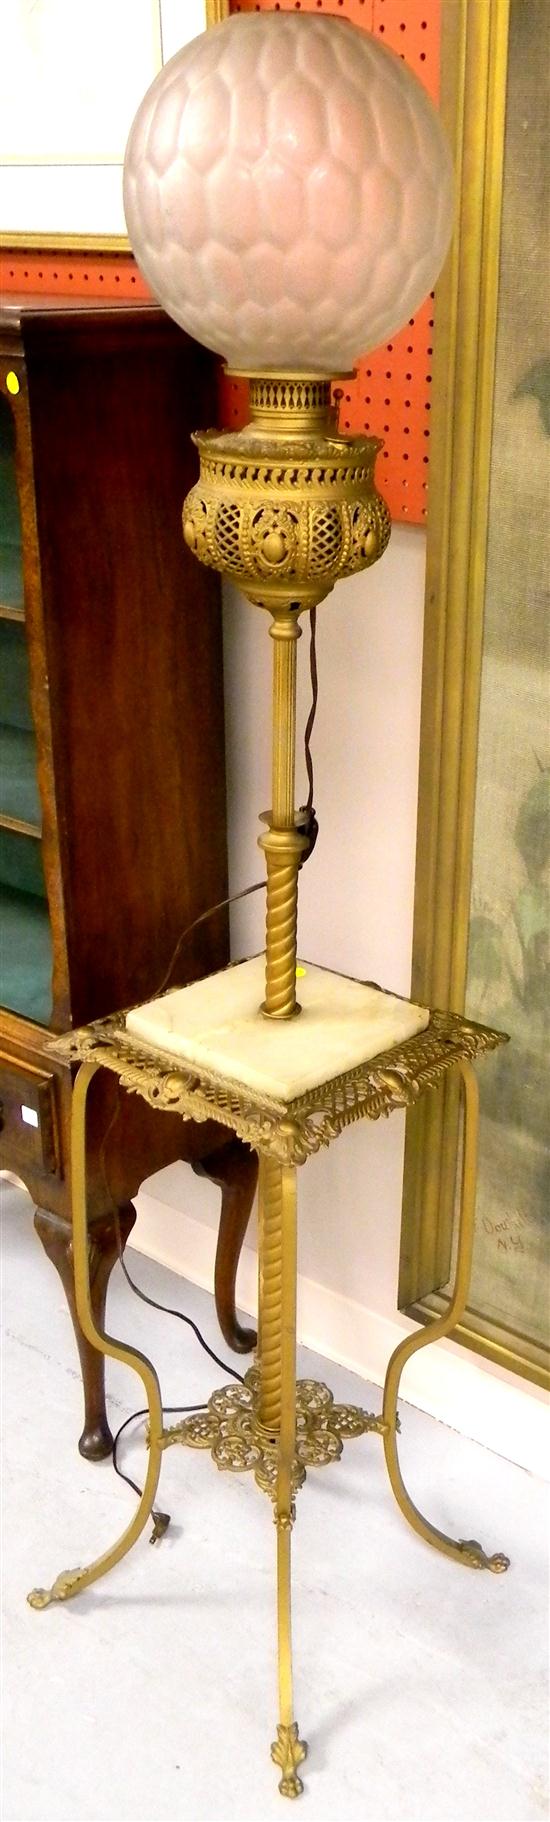 Electrified banquet lamp on brass